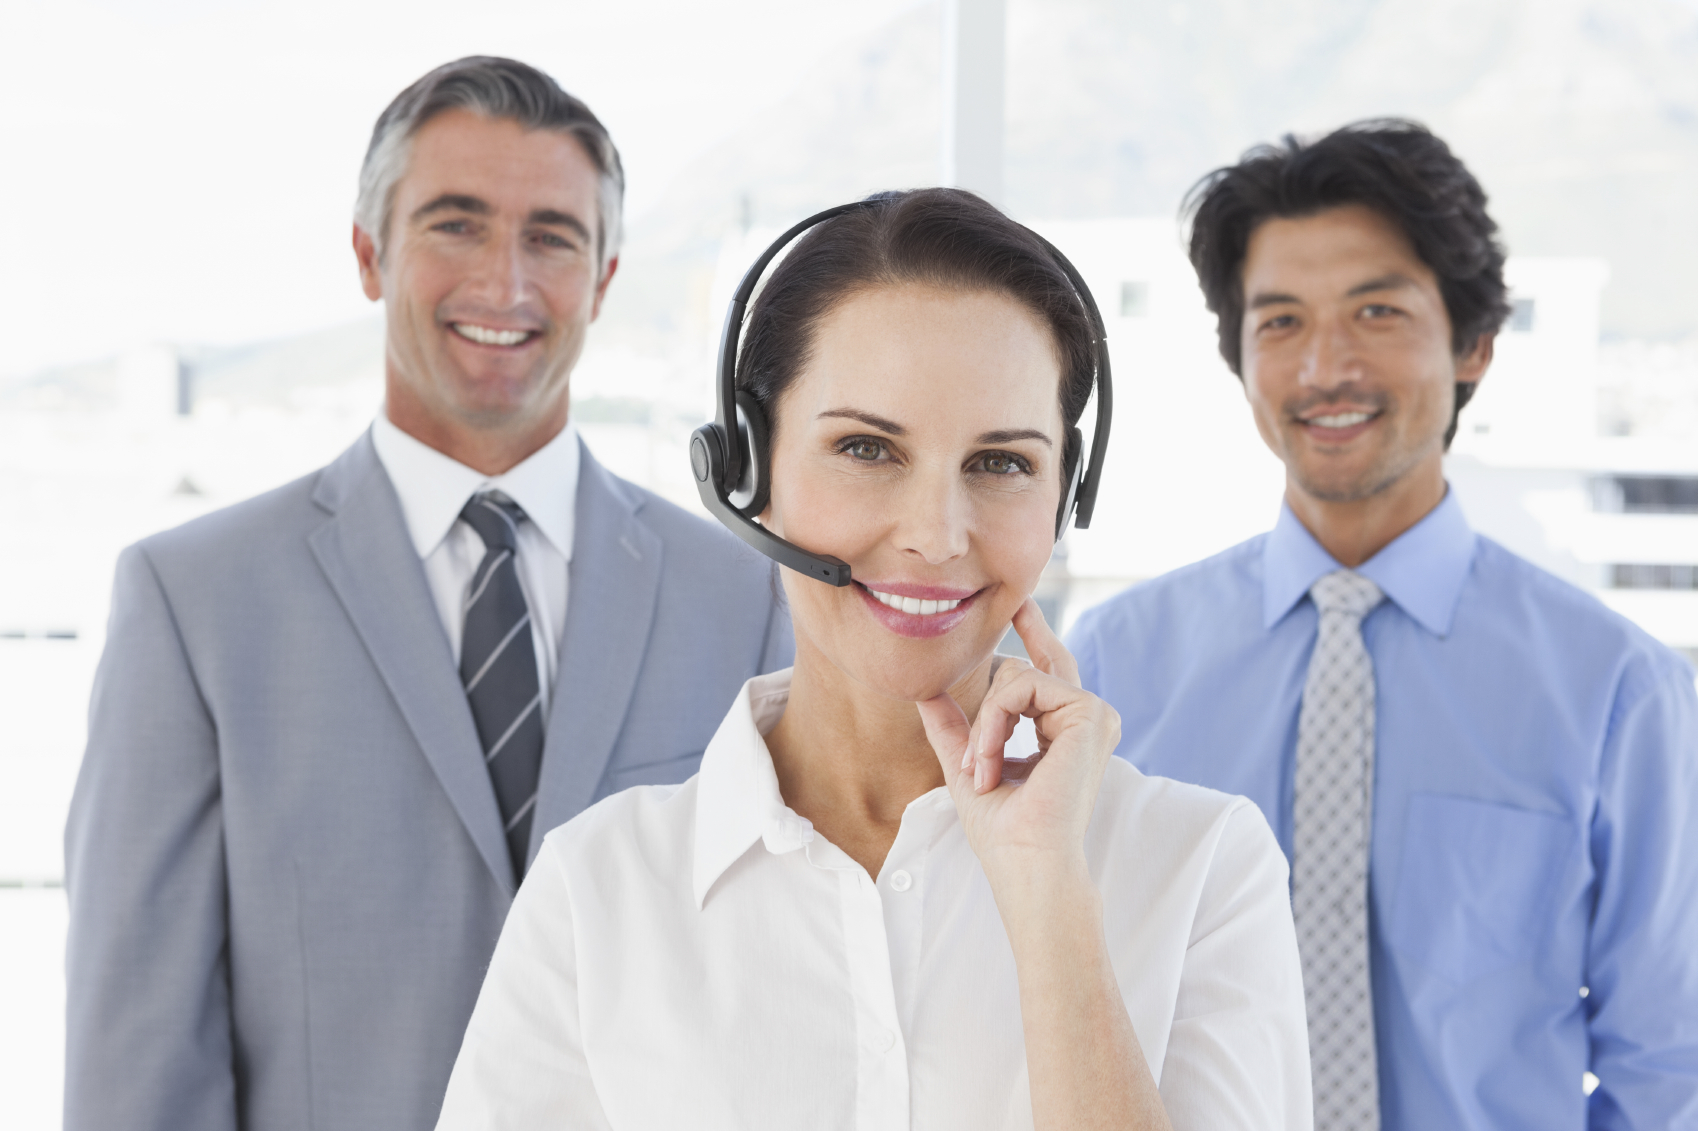 Looking for customer service call center jobs in newark nj